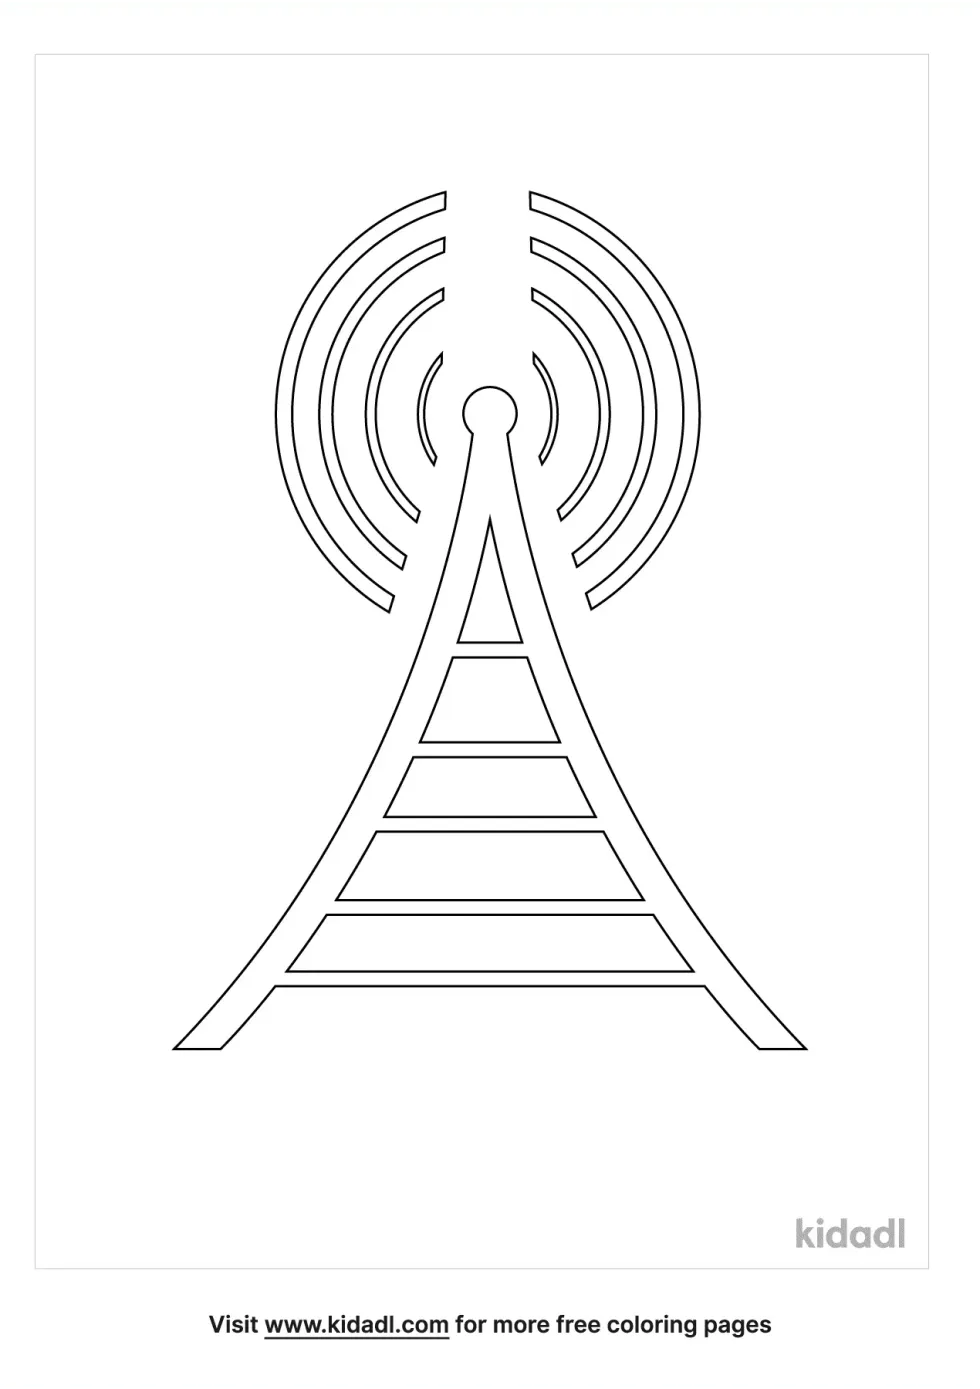 Transmitter Coloring Page